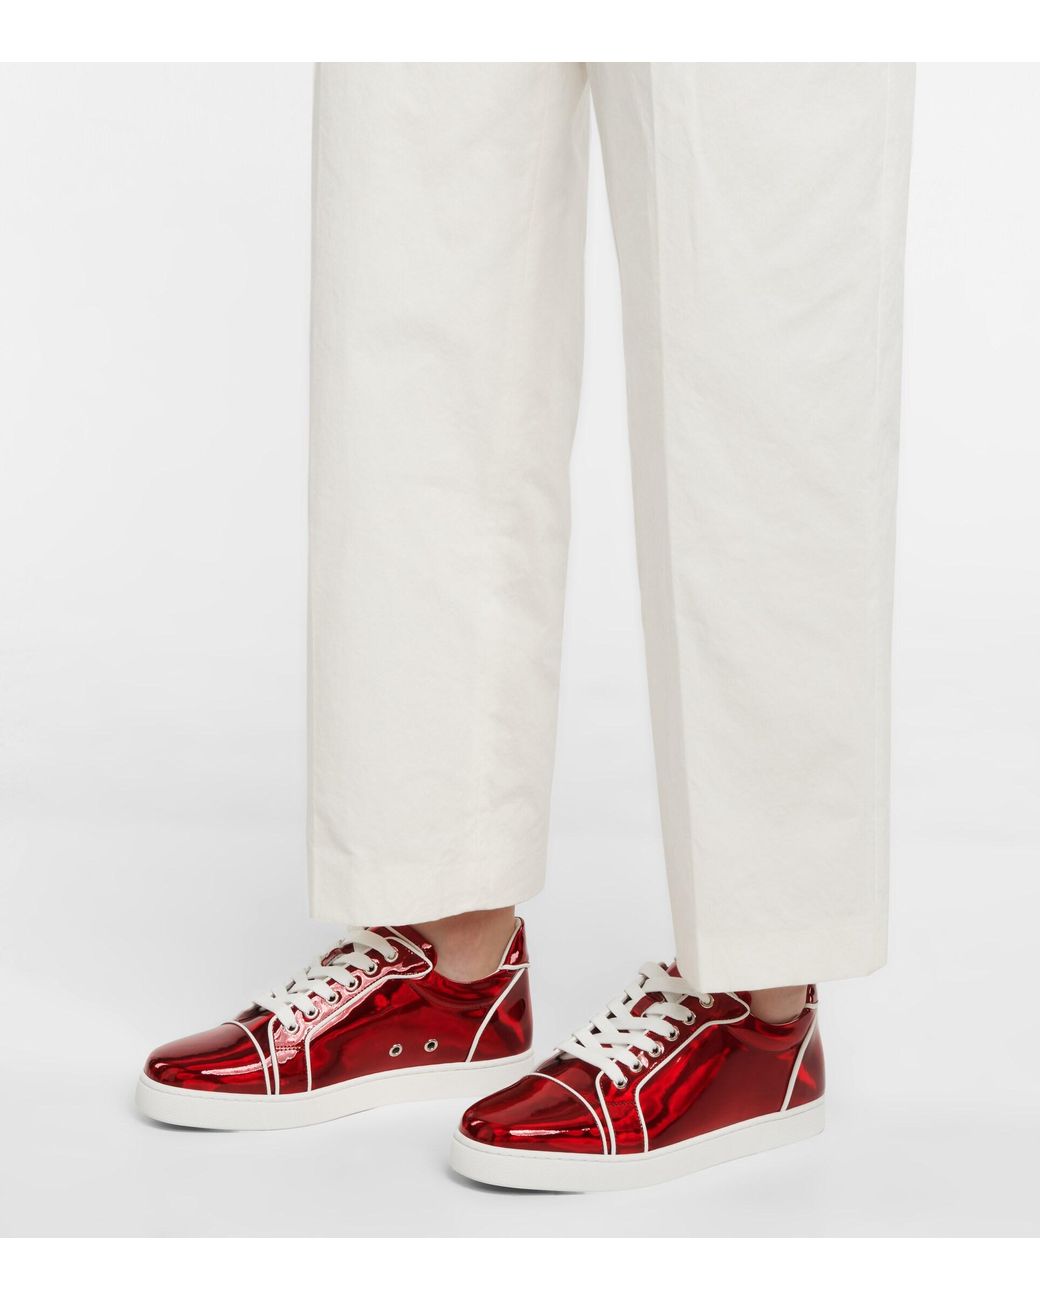 Christian Louboutin Viera Orlato Patent Leather Sneakers in Red | Lyst